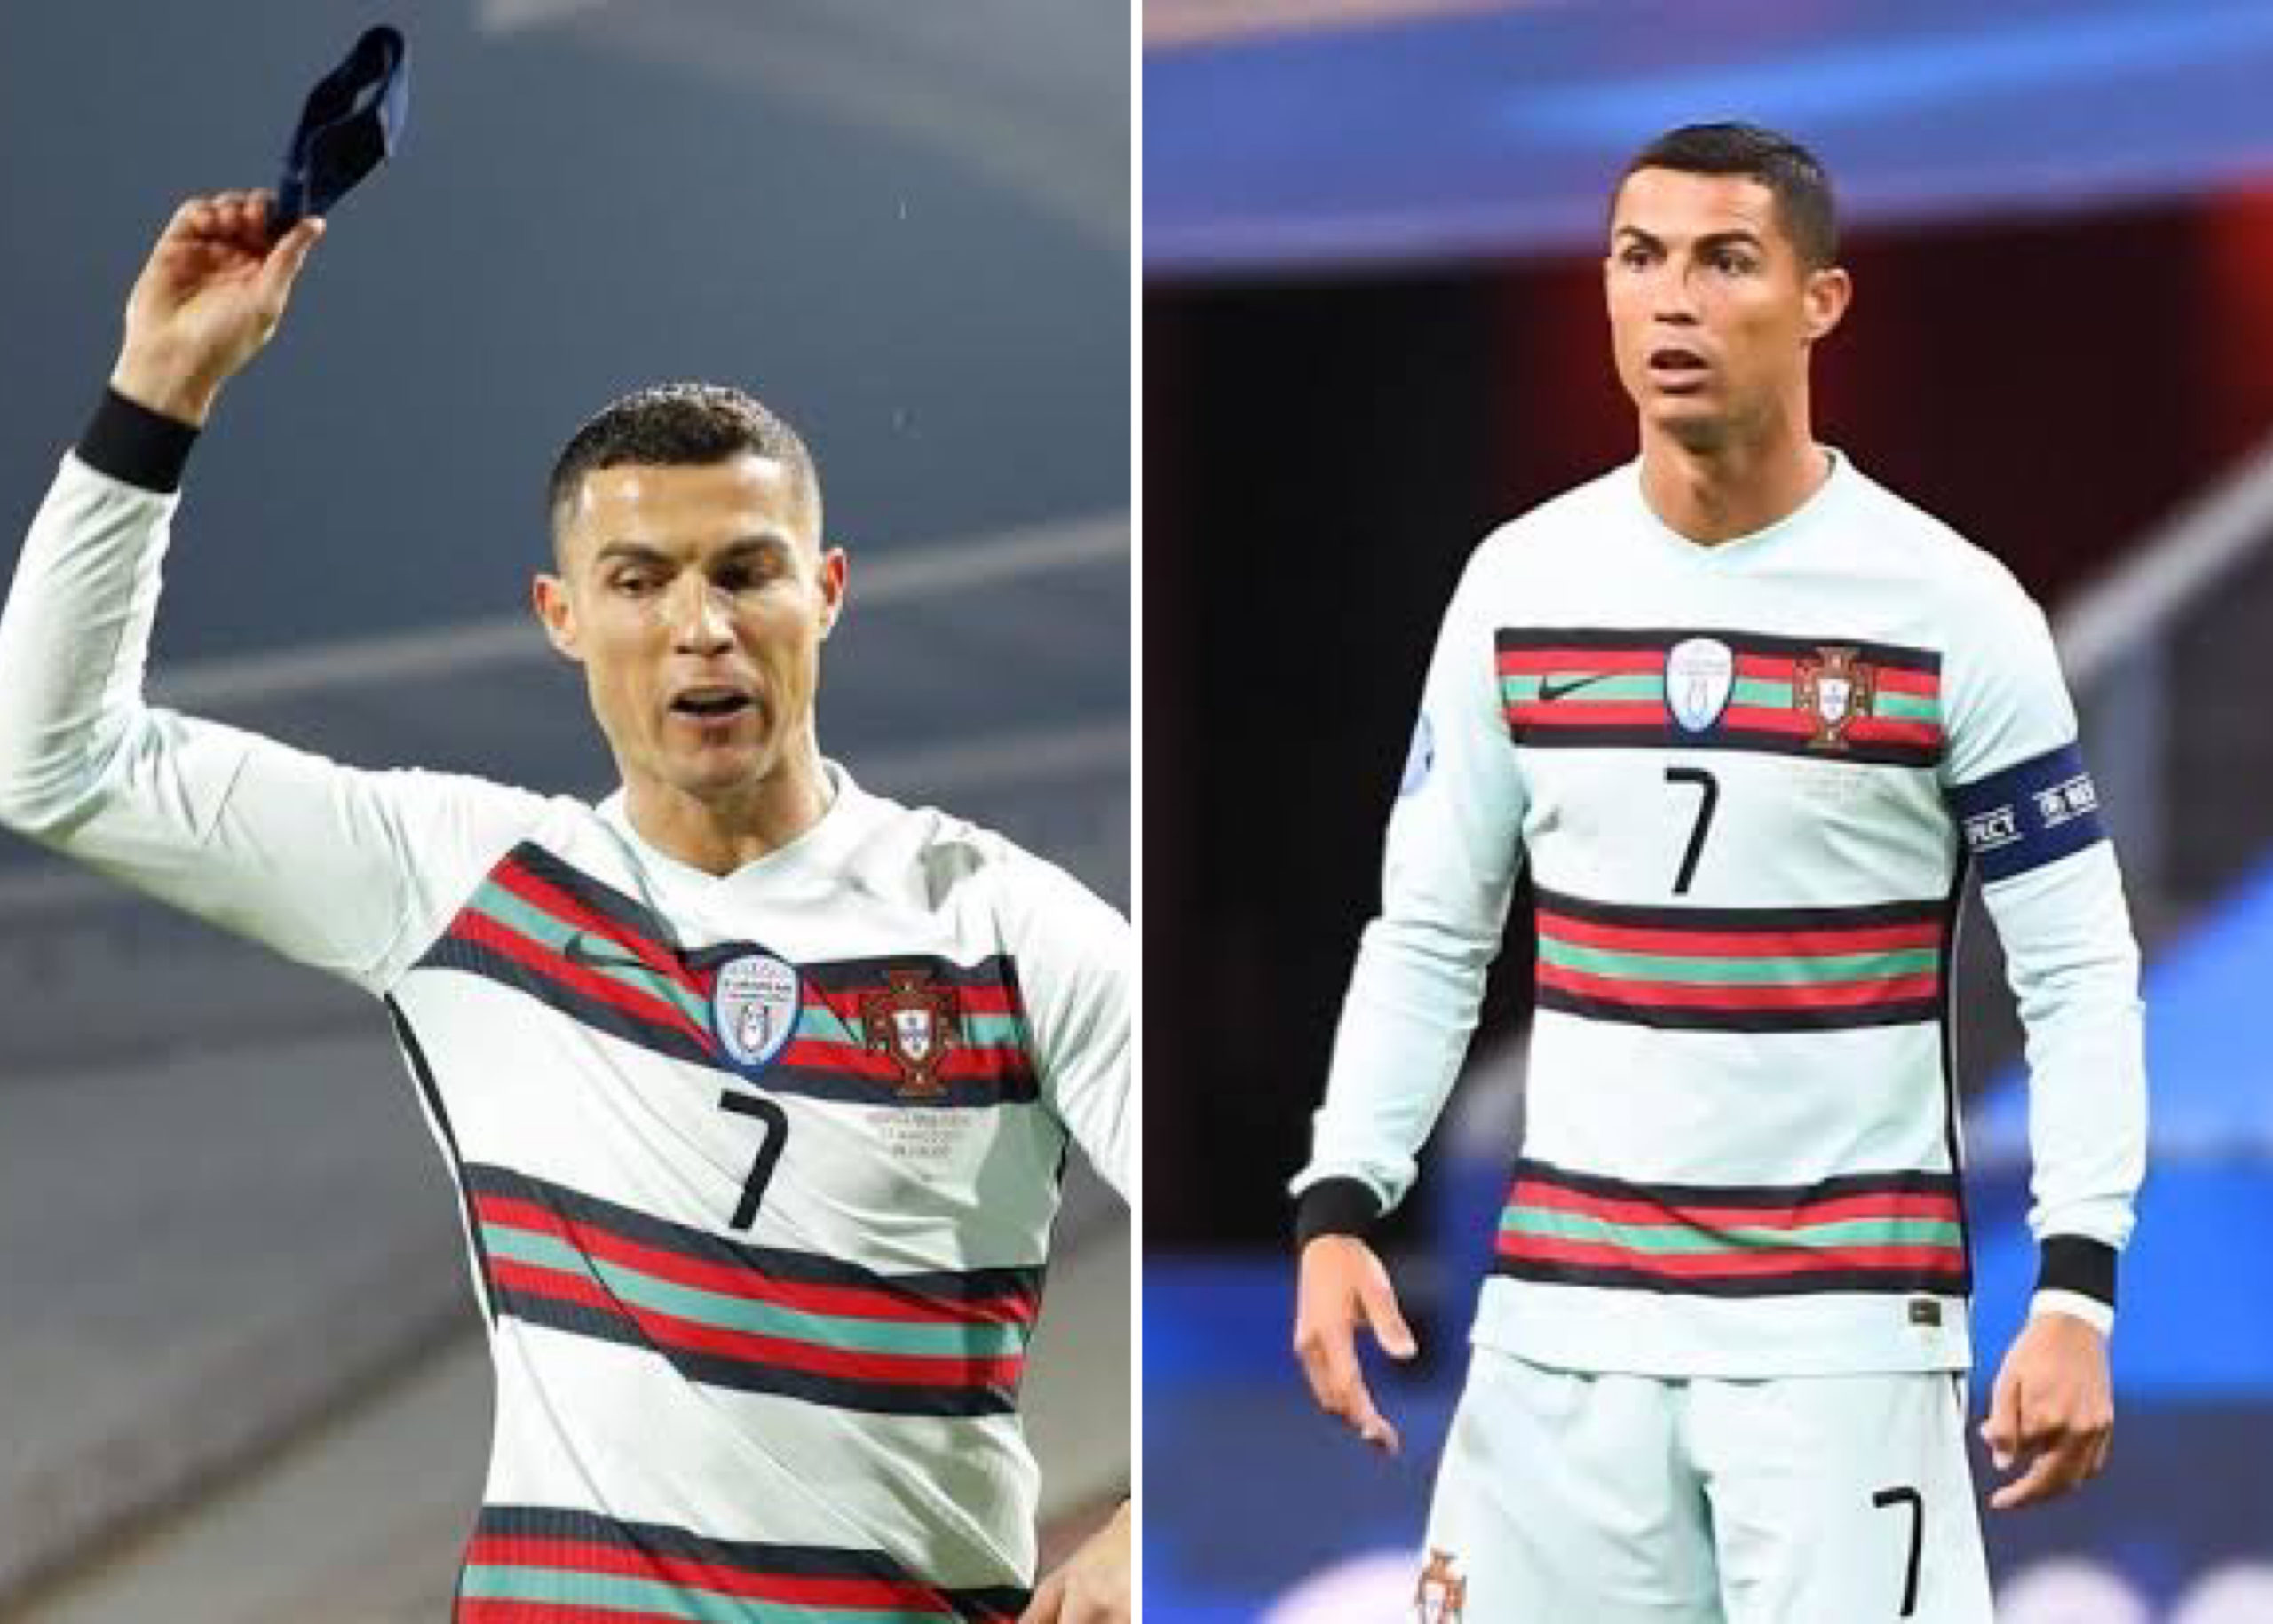 Captain Armband Thrown Away By Cristiano Ronaldo Sold For $75,000 At Charity Auction